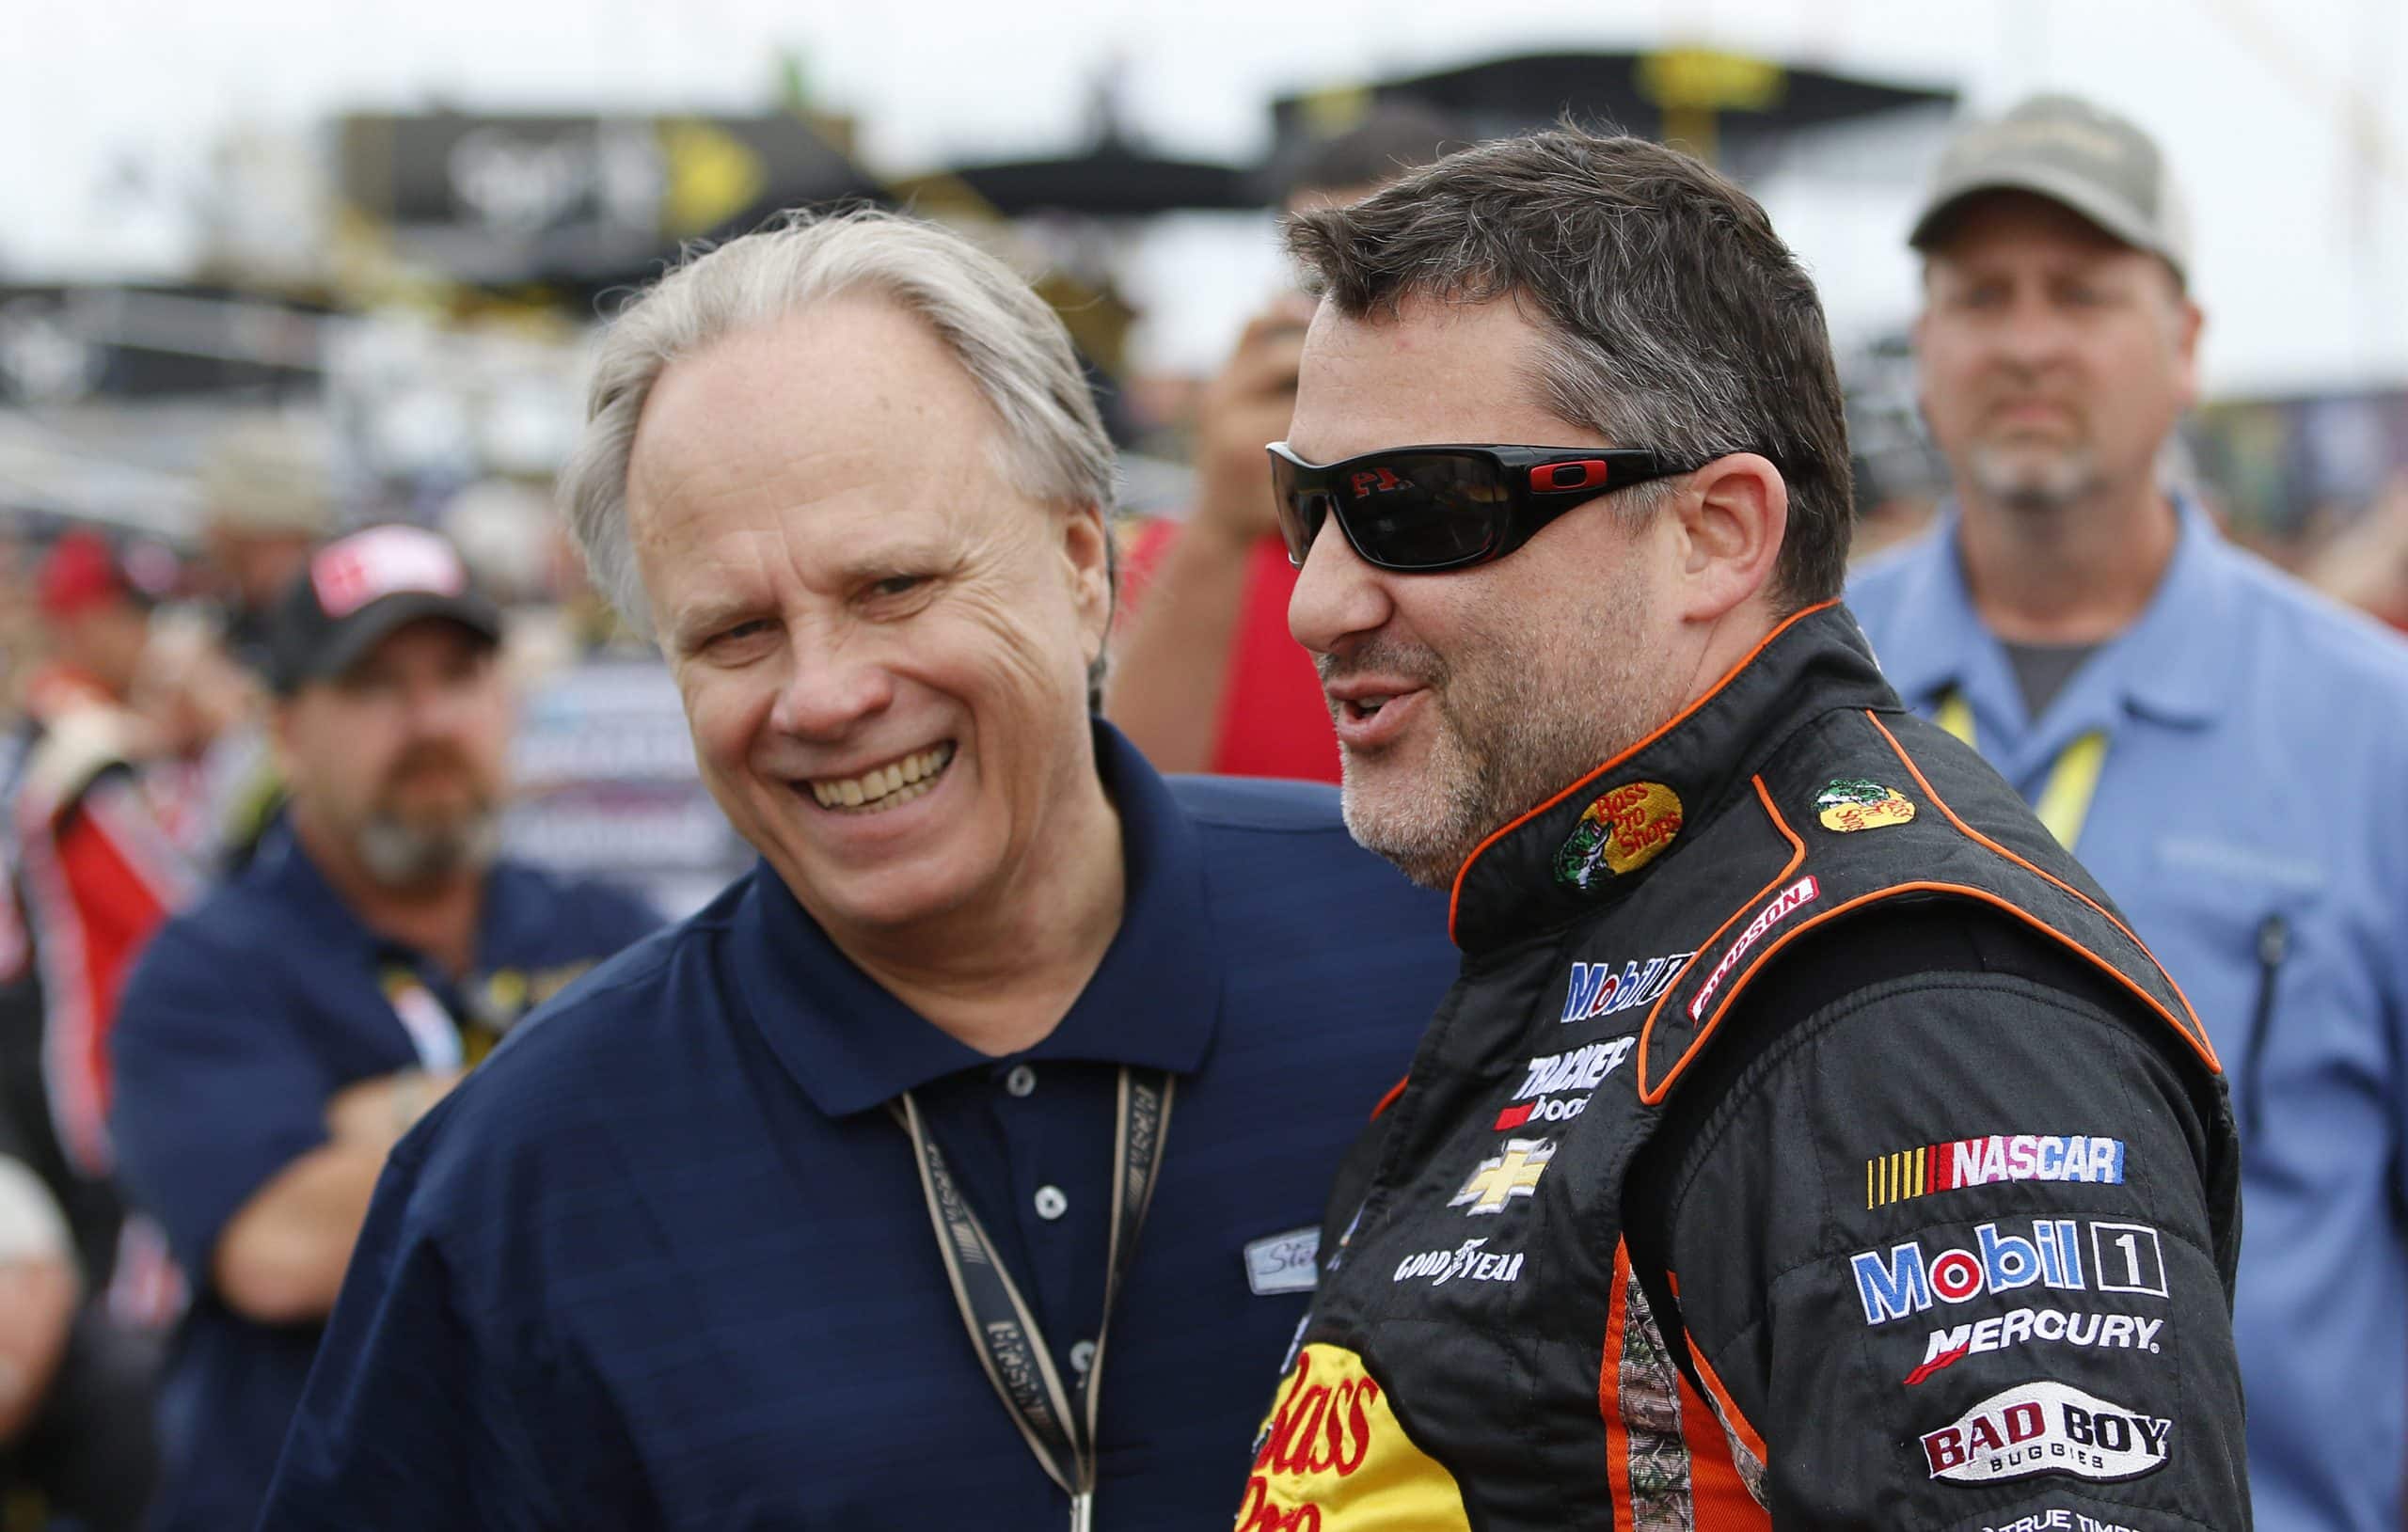 October 25, 2015: Gene Haas (l) and Tony Stewart (r) prior to the CampingWorld.com 500 NASCAR Sprint Cup race at the Talladega Superspeedway in Talladega, AL. (Photo by David J. Griffin/Icon Sportswire) (Photo by David J. Griffin/Icon Sportswire/Corbis/Icon Sportswire via Getty Images)